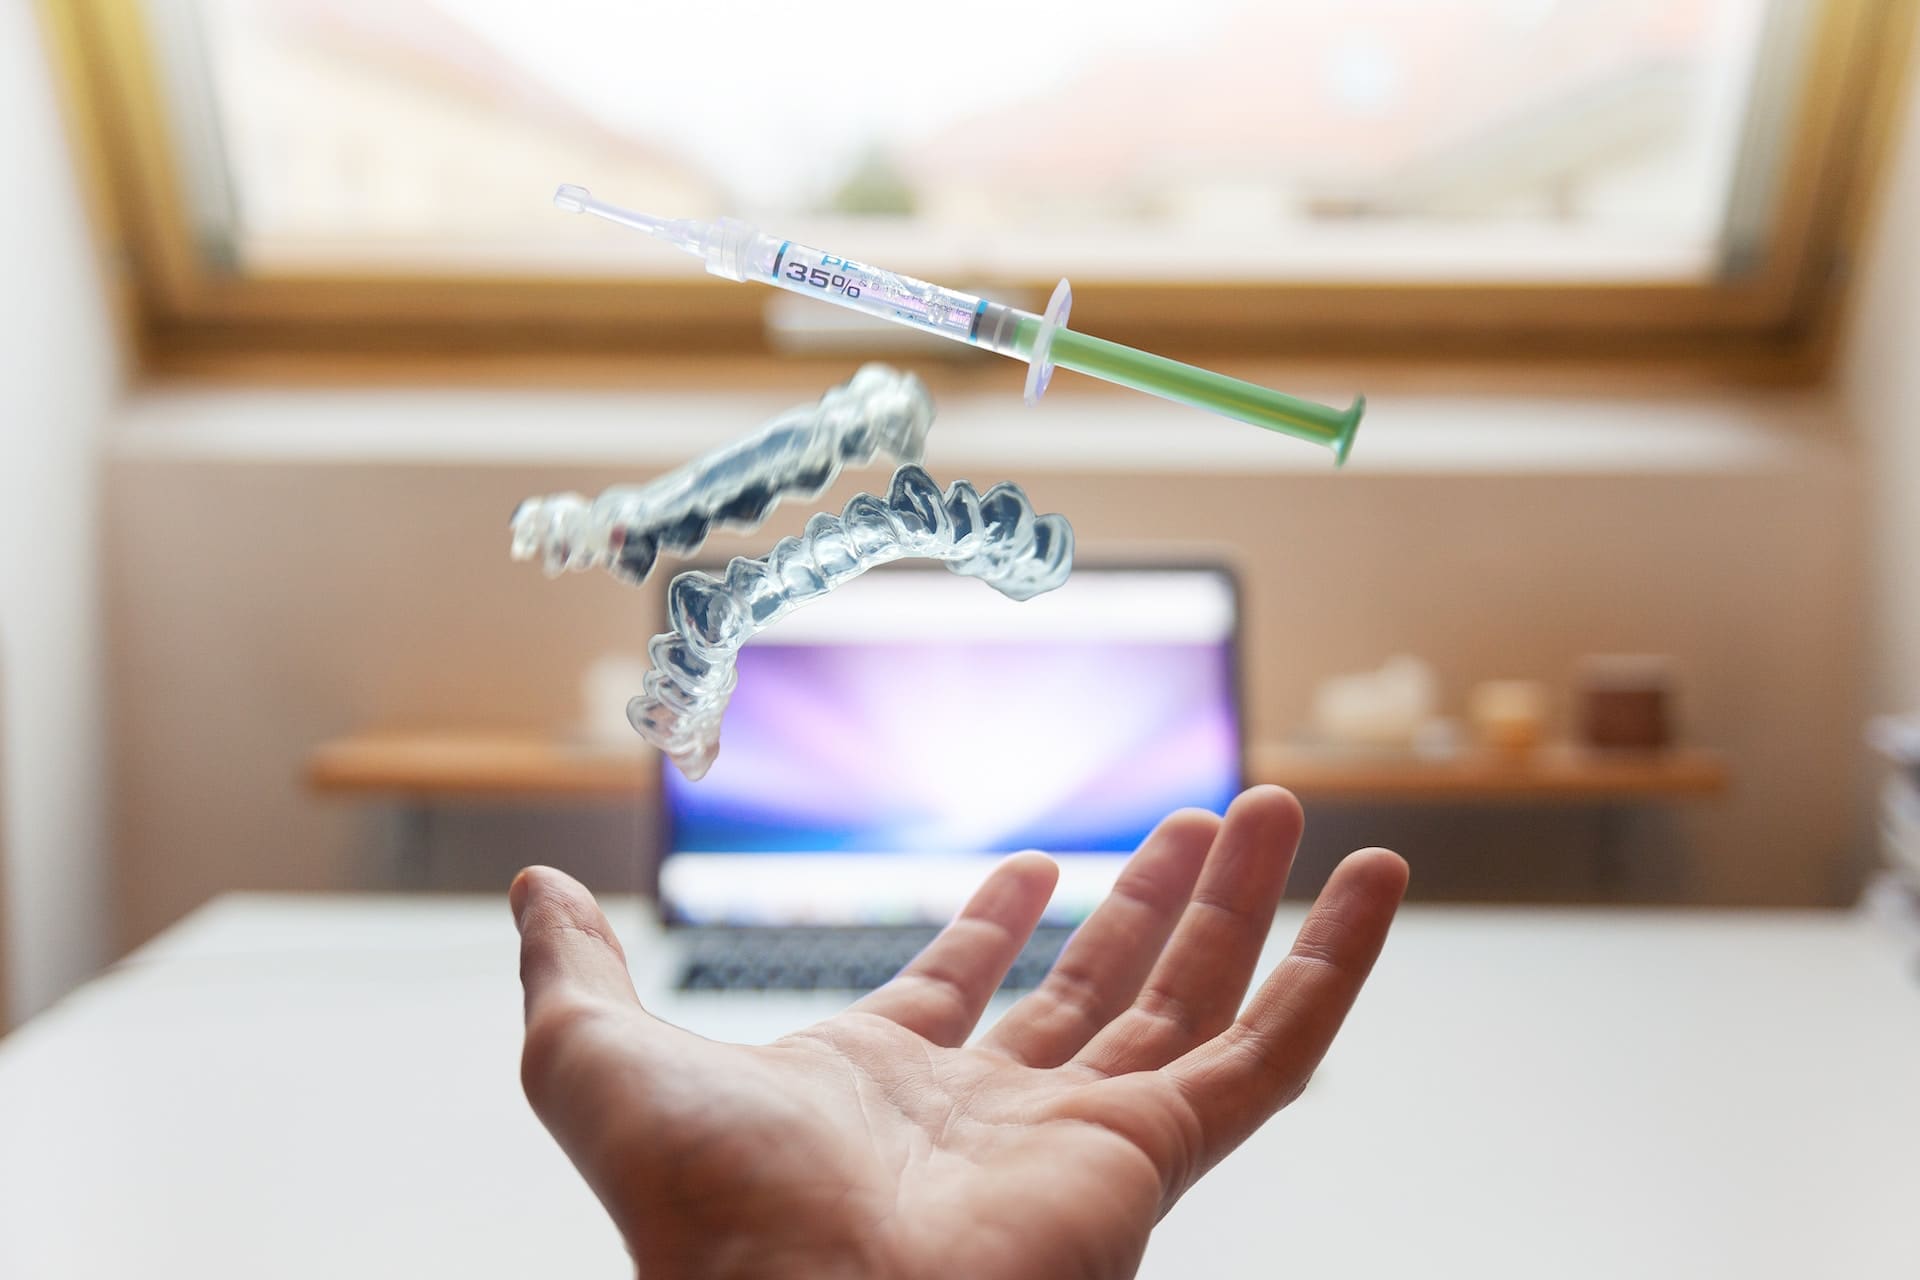 Hand holding a syringe with Invisalign aligners in the air against an ecstatic background.